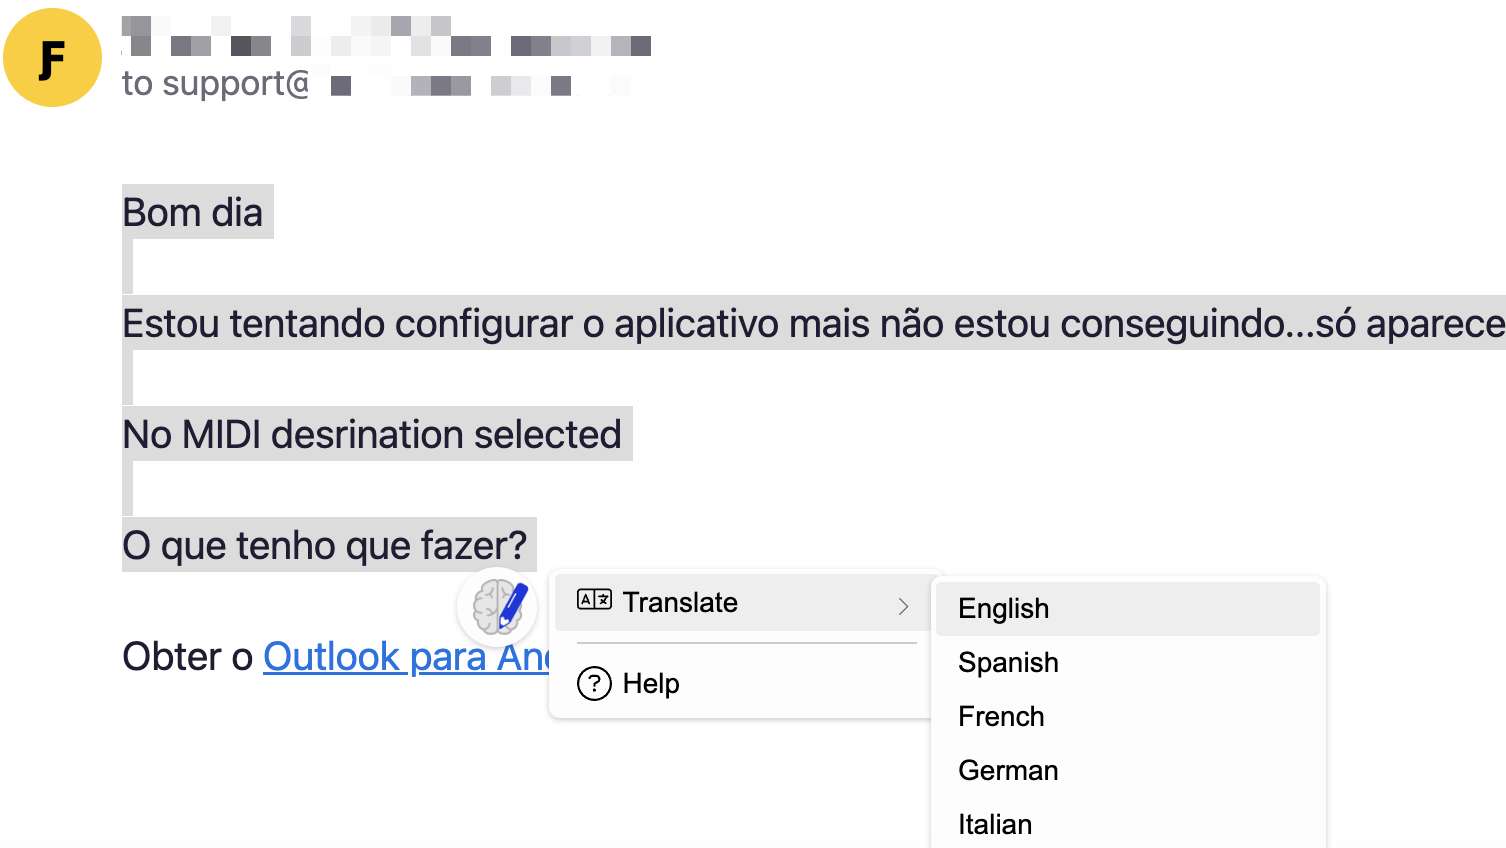 Select foreign language (Portuguese) text to translate